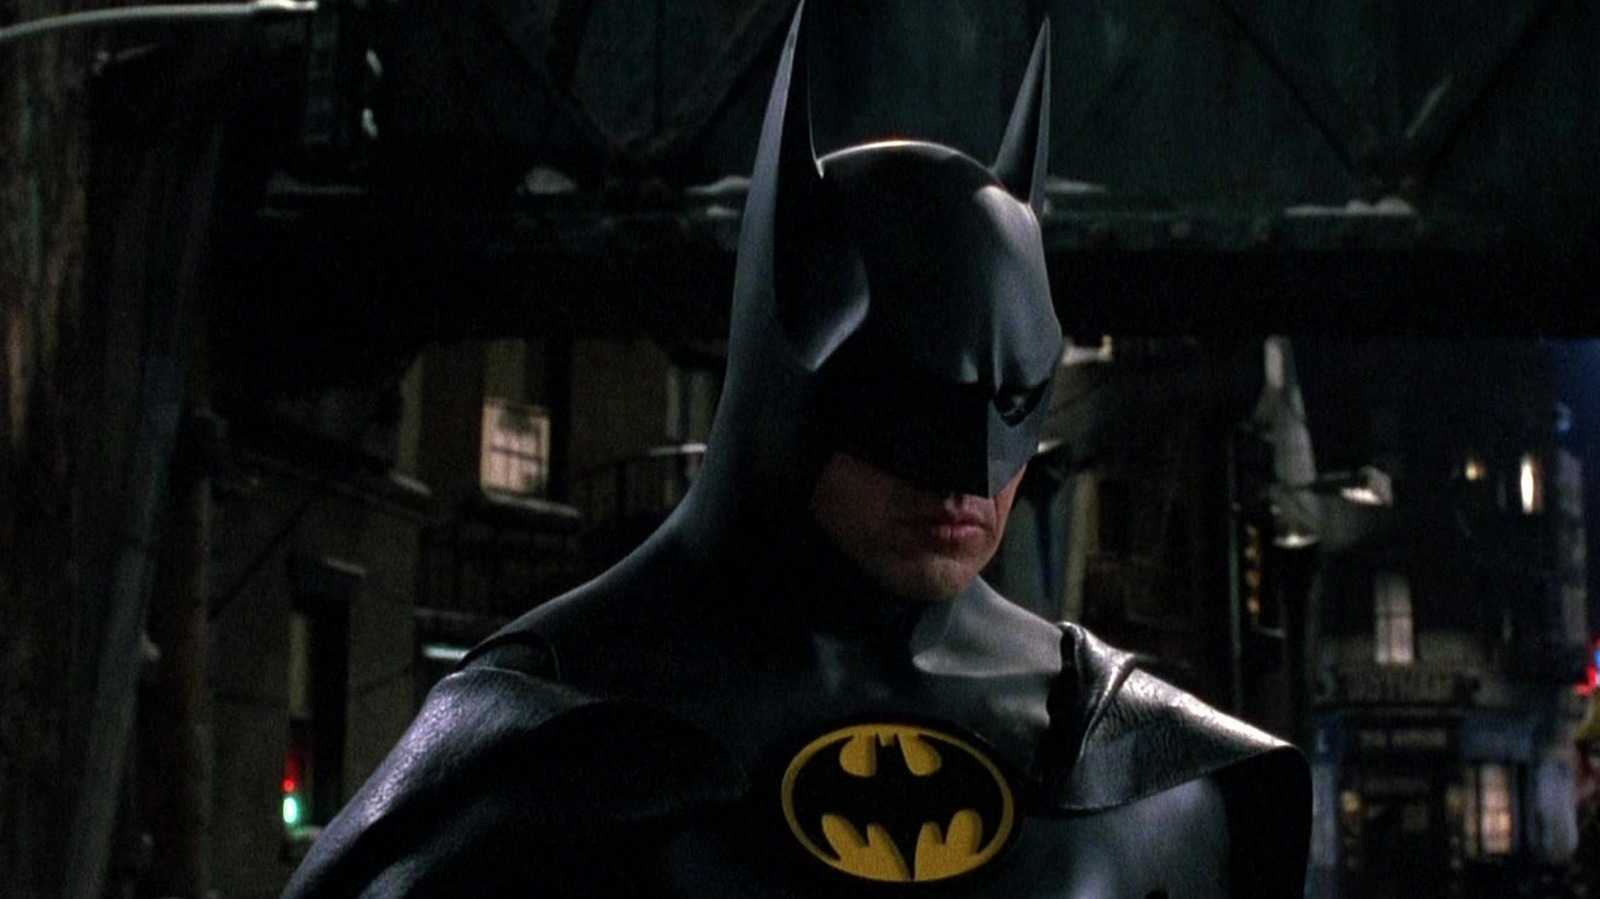 Michael Keaton reveals why he chose to return as The Dark Knight in the DCEU